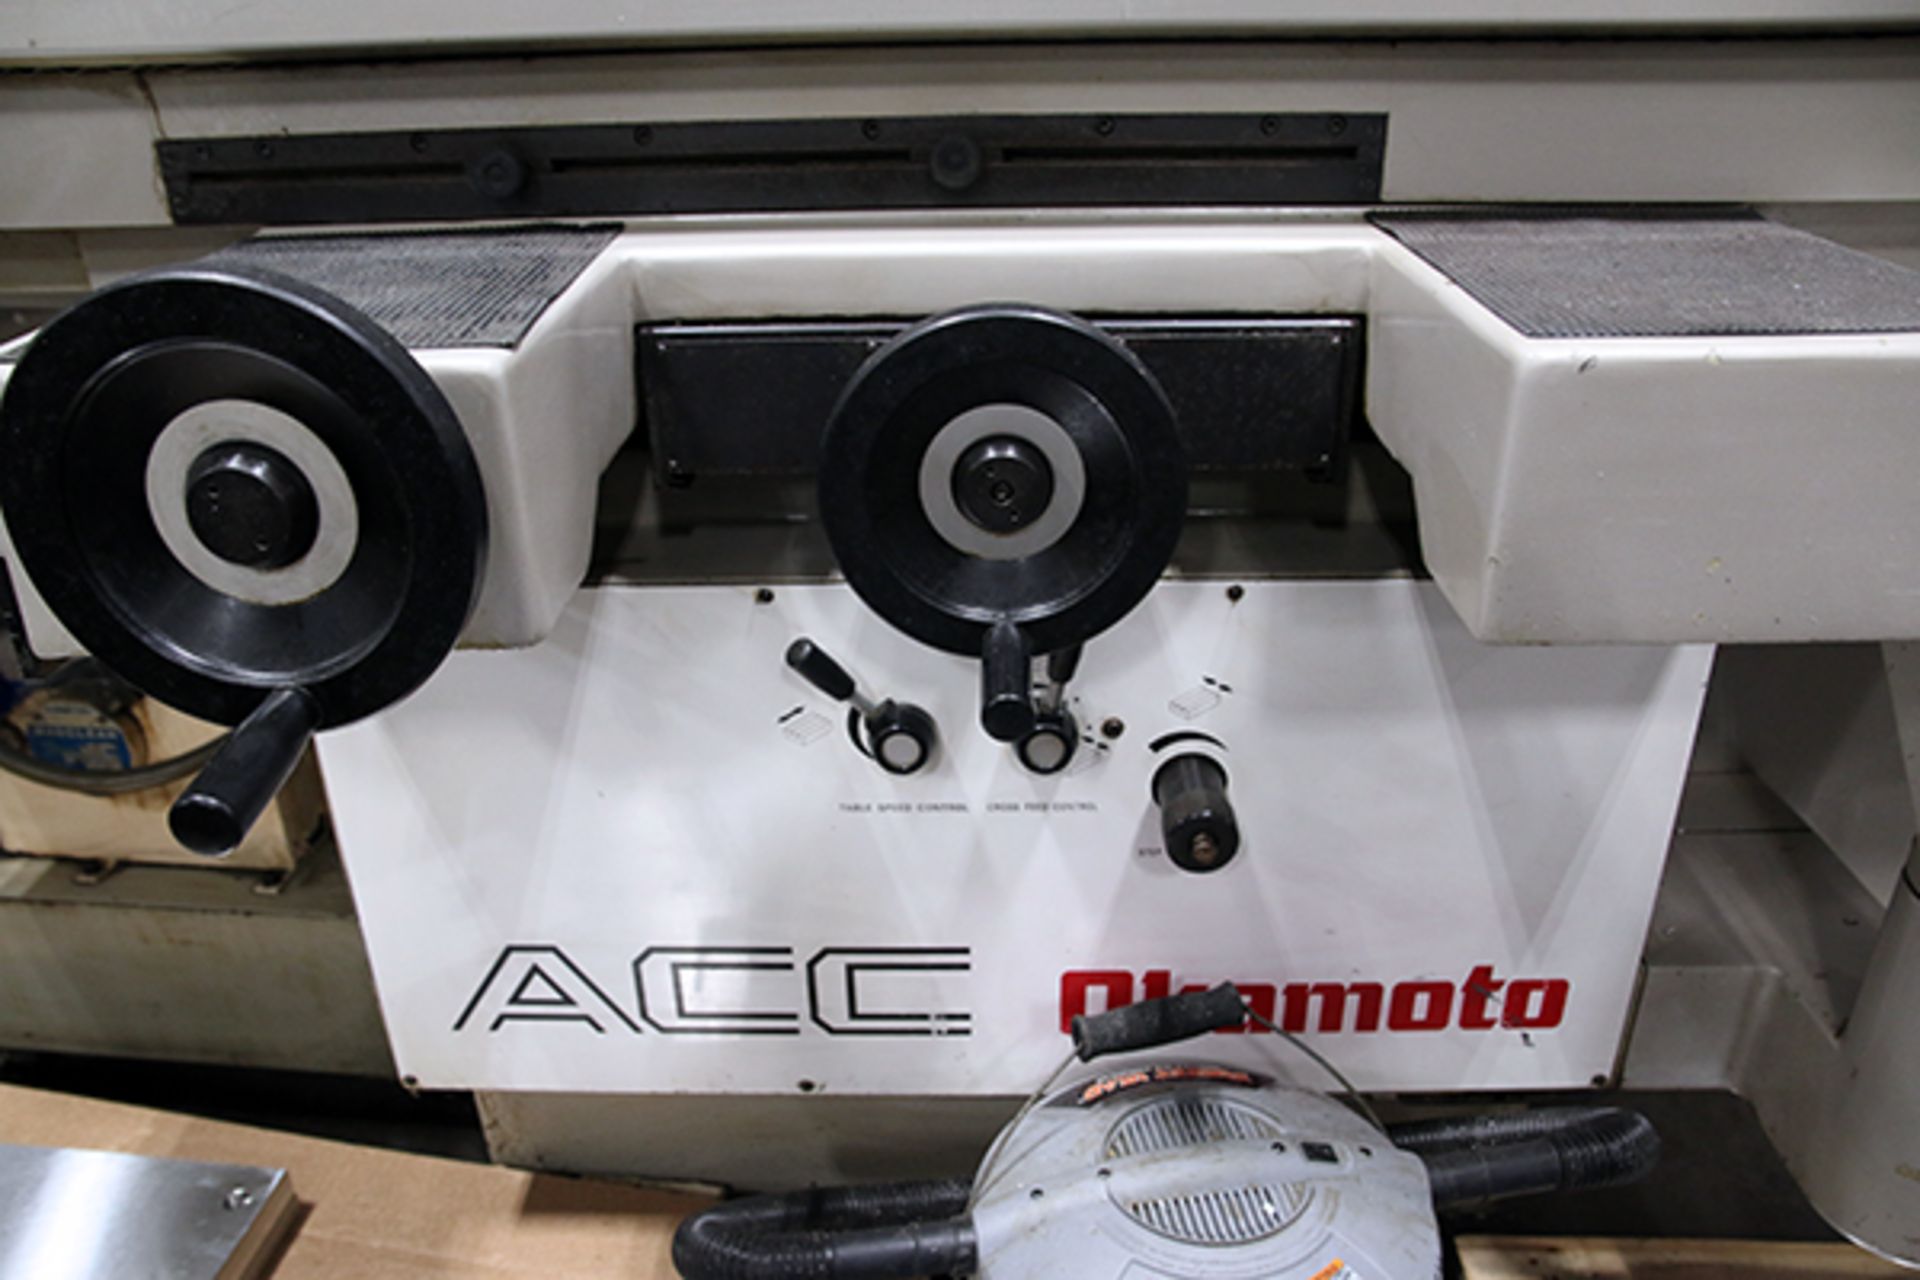 Okamoto ACC-1224DX Automatic Surface Grinder - Image 5 of 10